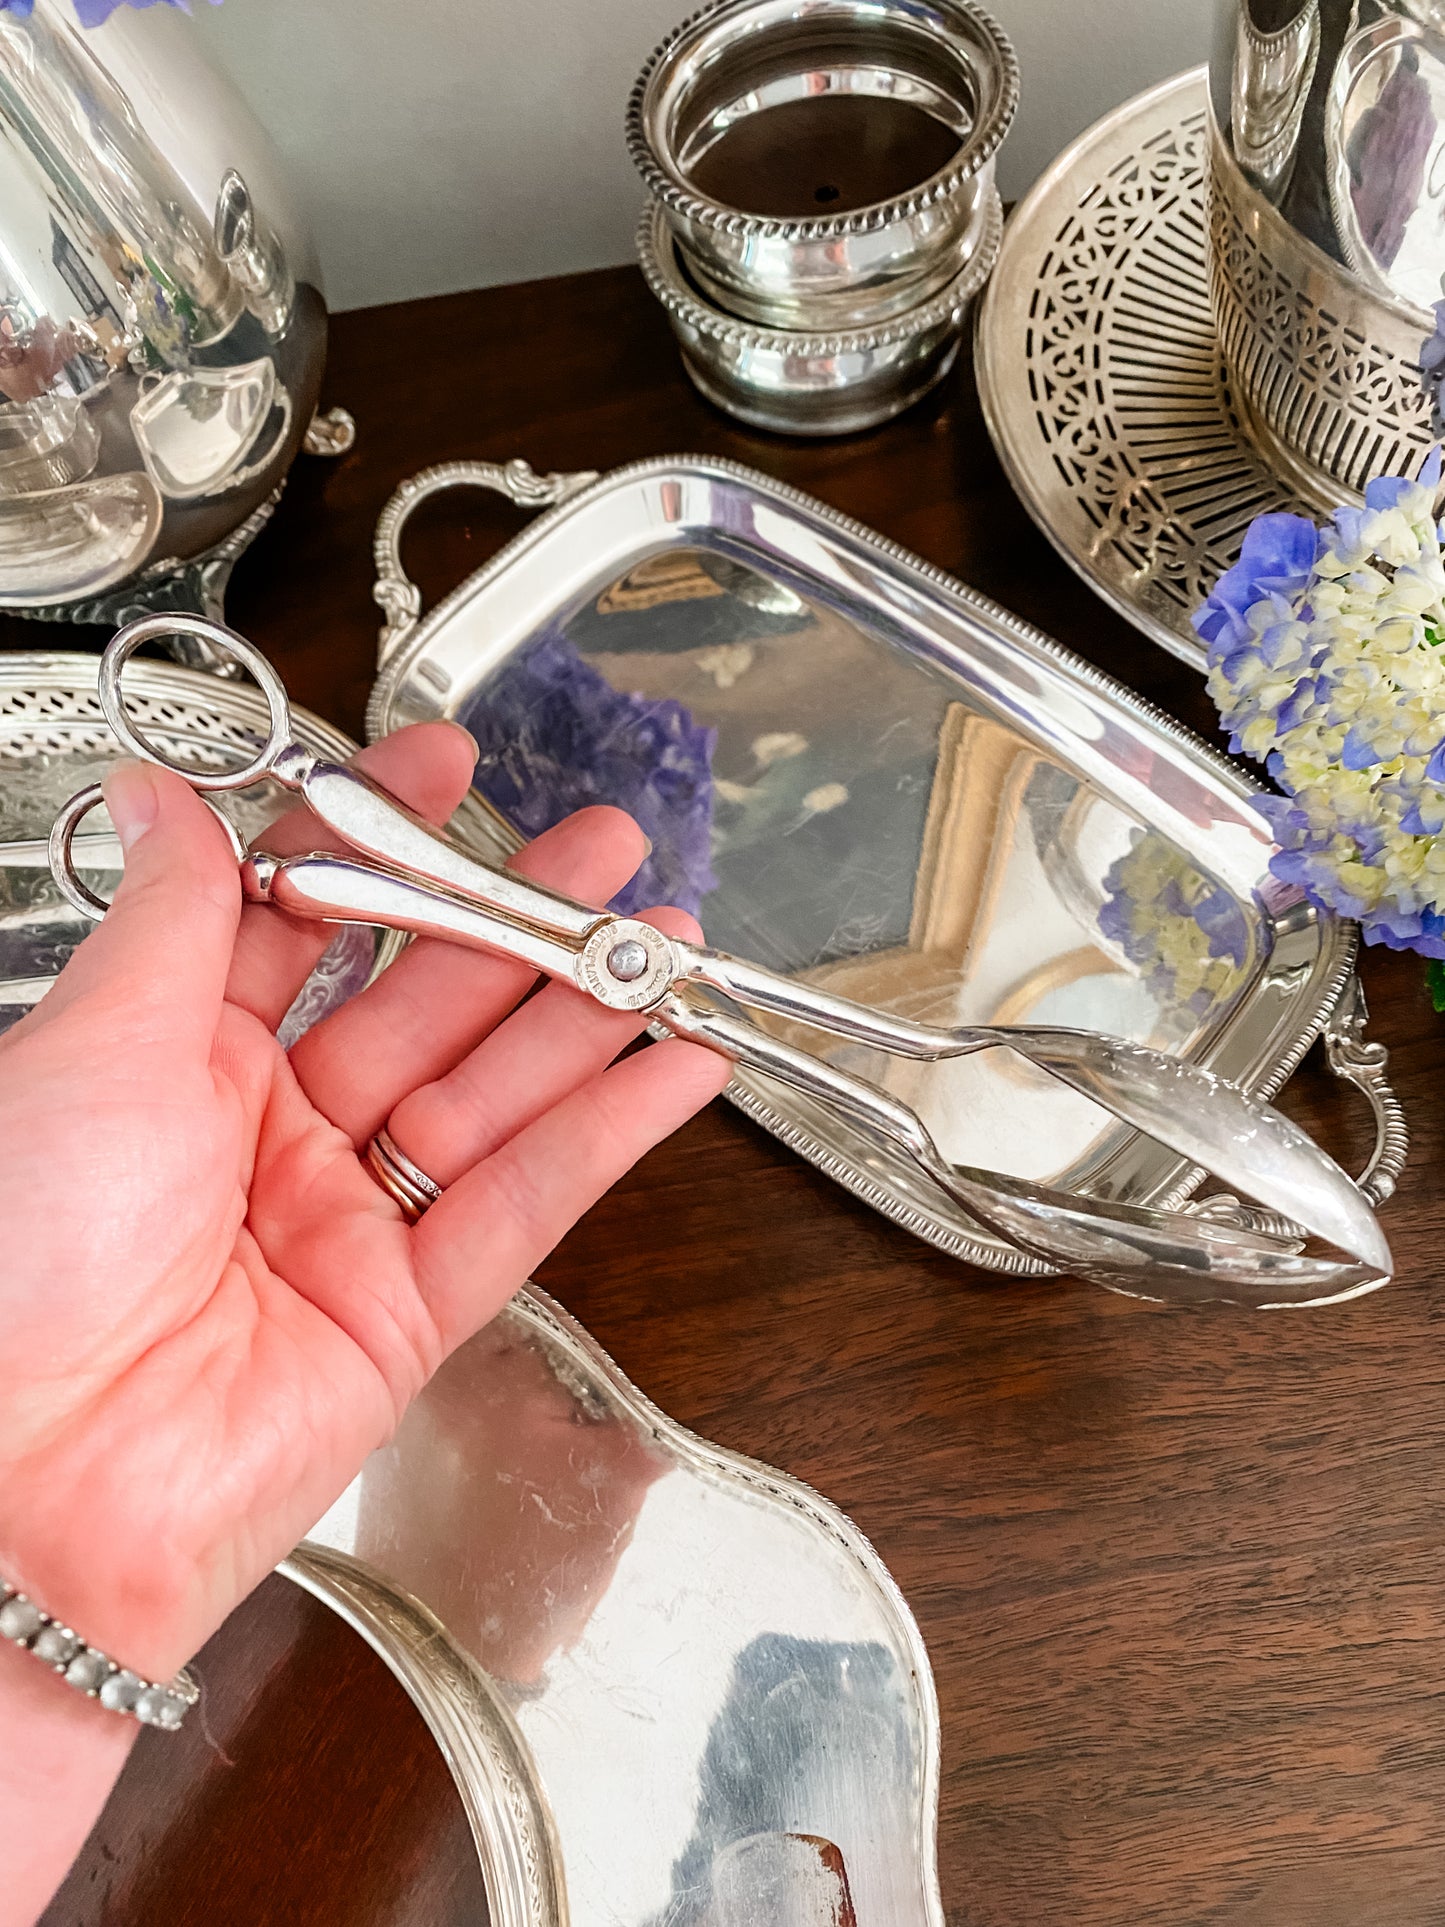 Antique Silver Tray and Serving Tongs